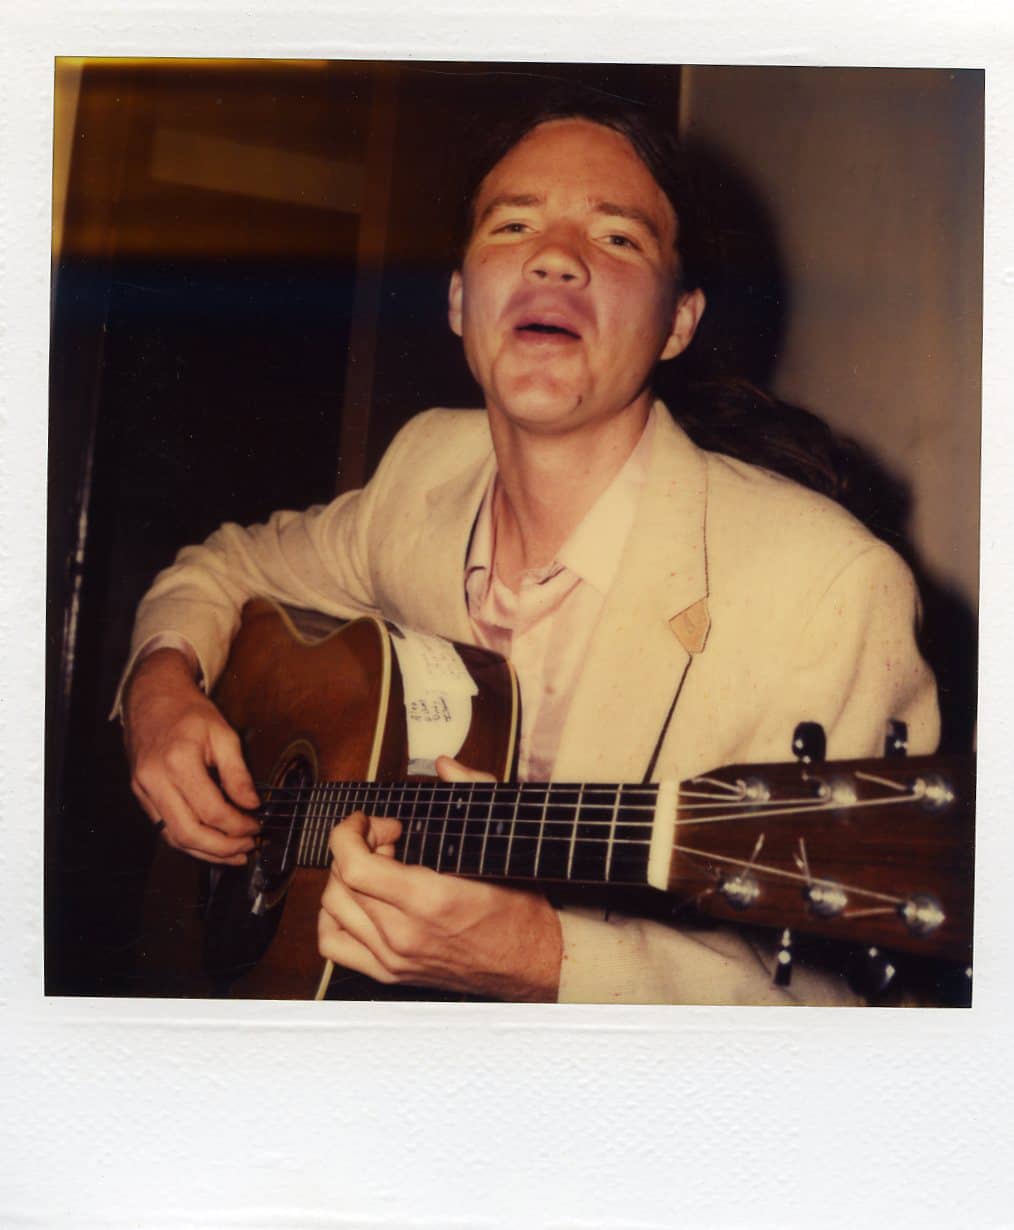 Polaroid of Michael singing and playing guitar